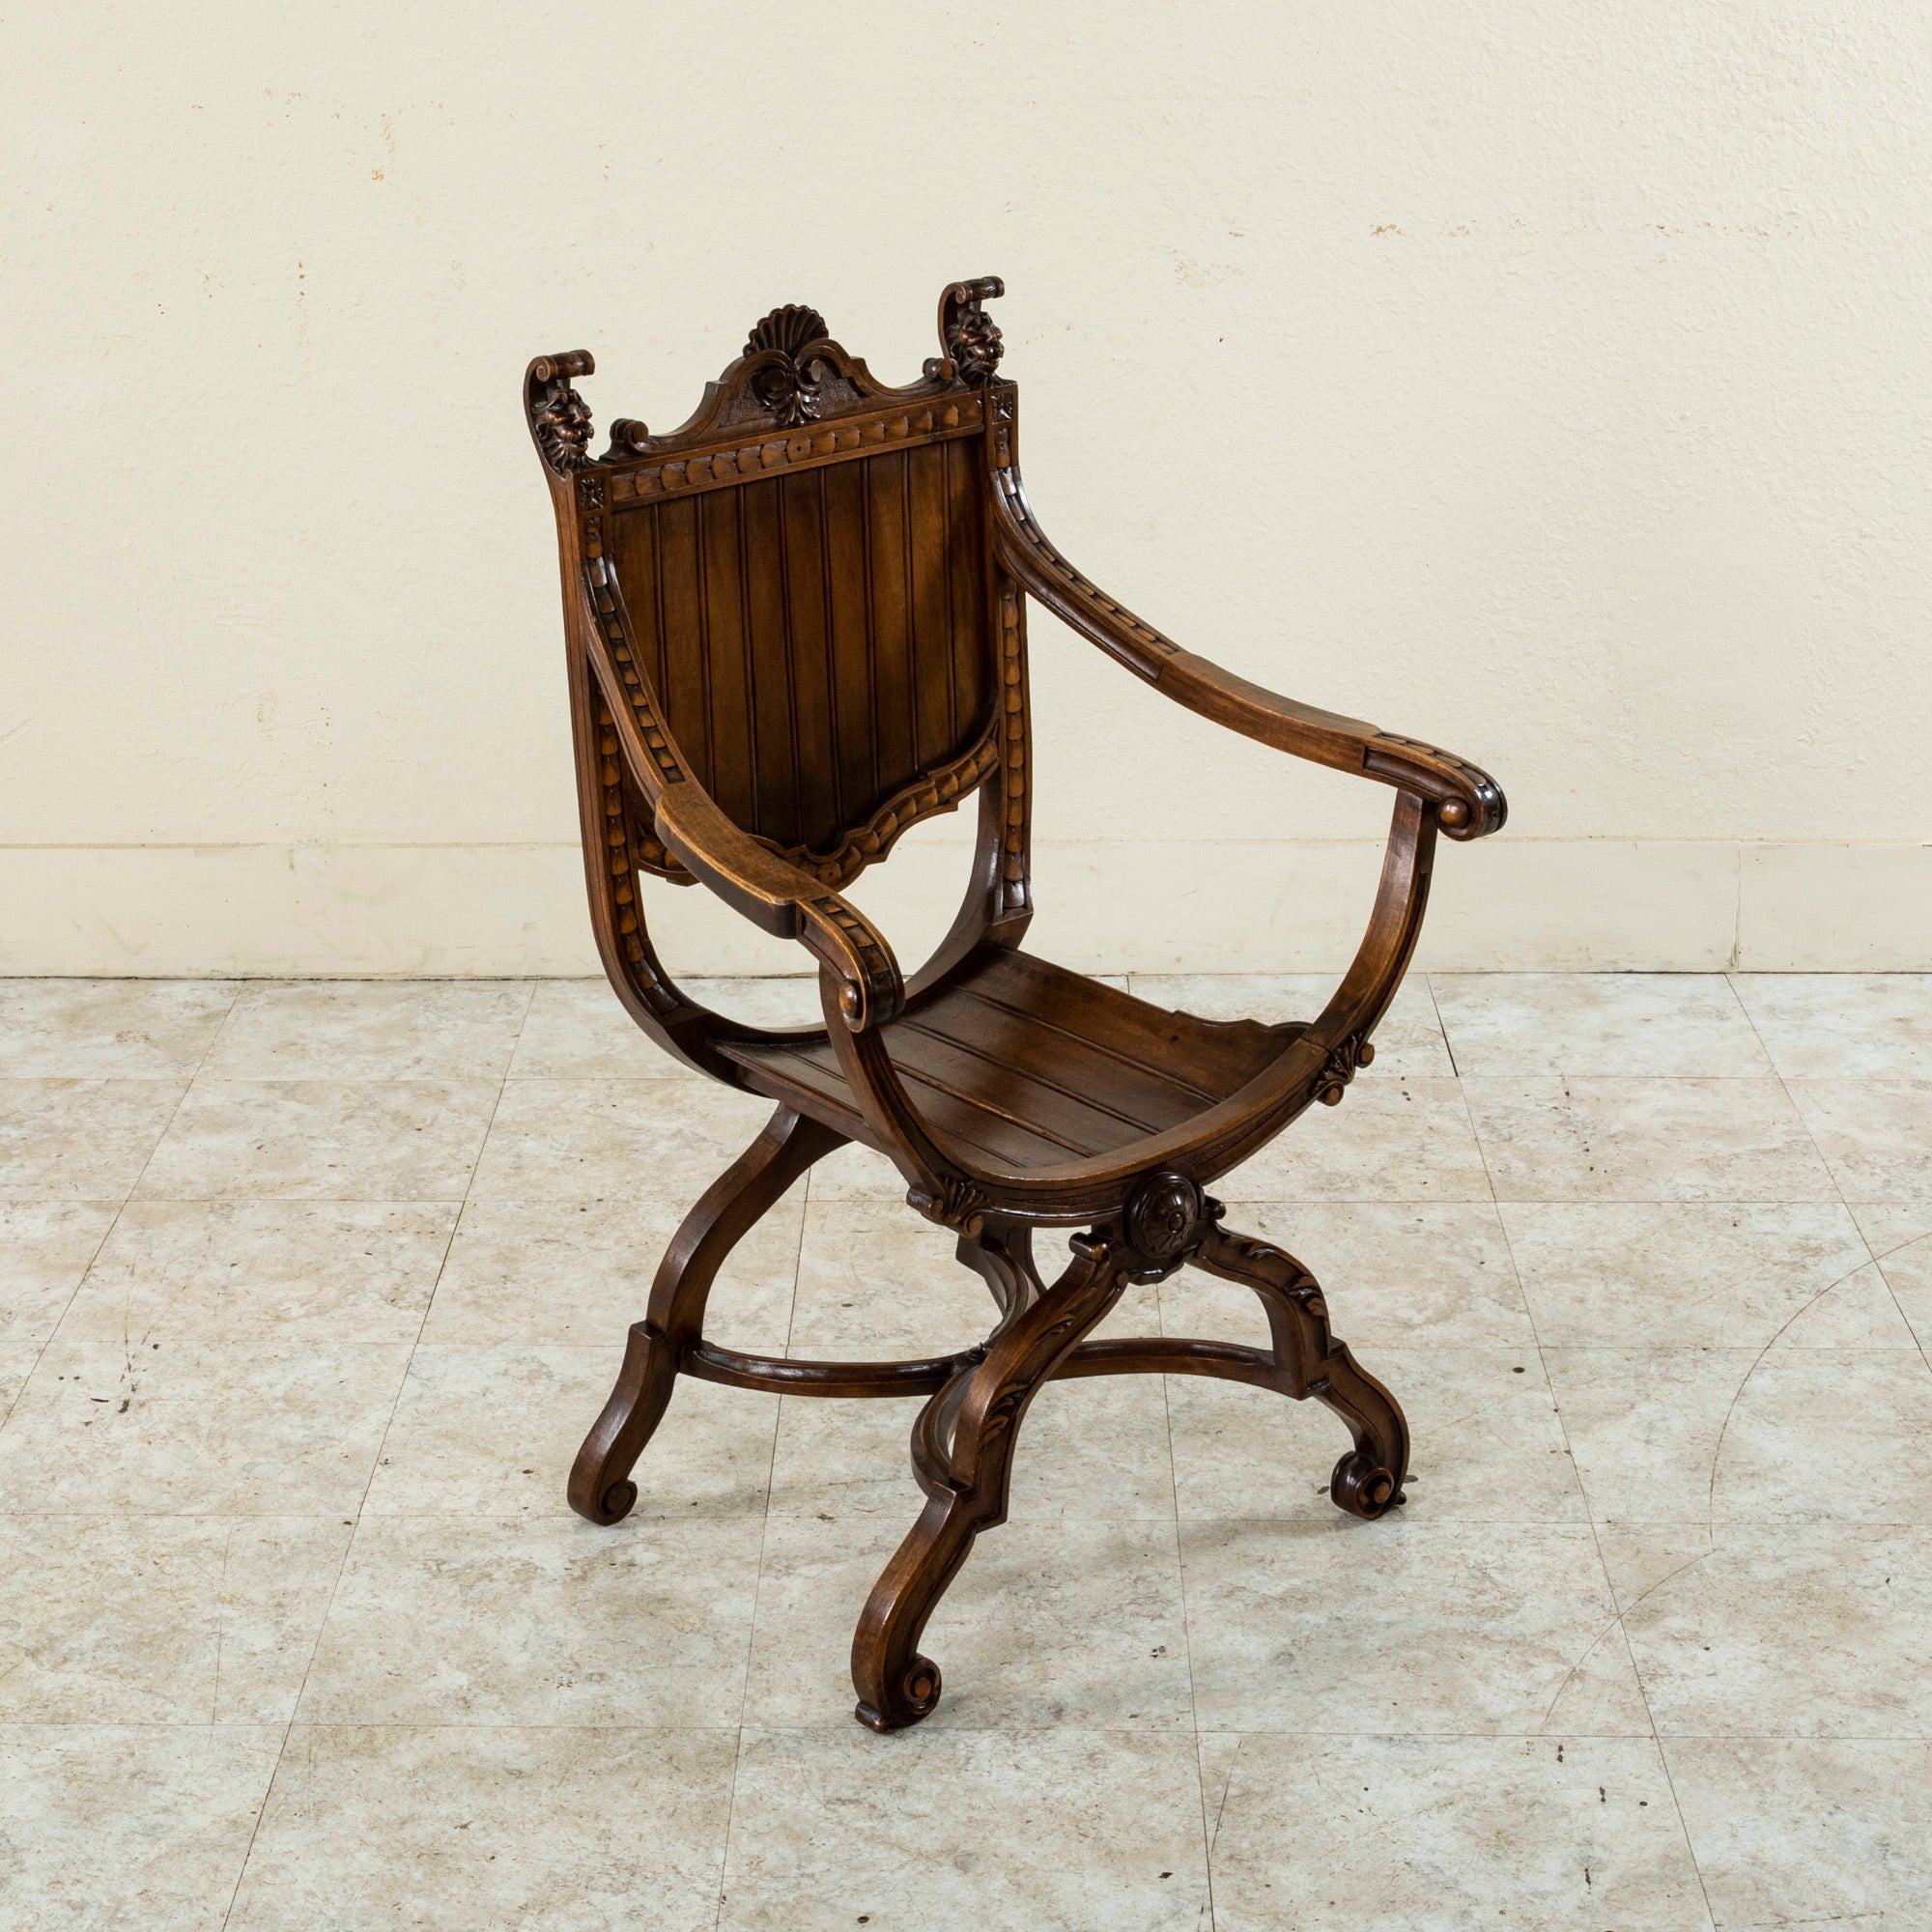 Of a rare smaller scale, this late nineteenth century French Dagobert chair was originally used by a young lady for needlework. The Dagobert chair is so named after the throne chair of King Dagobert I, the French king who reigned during the seventh